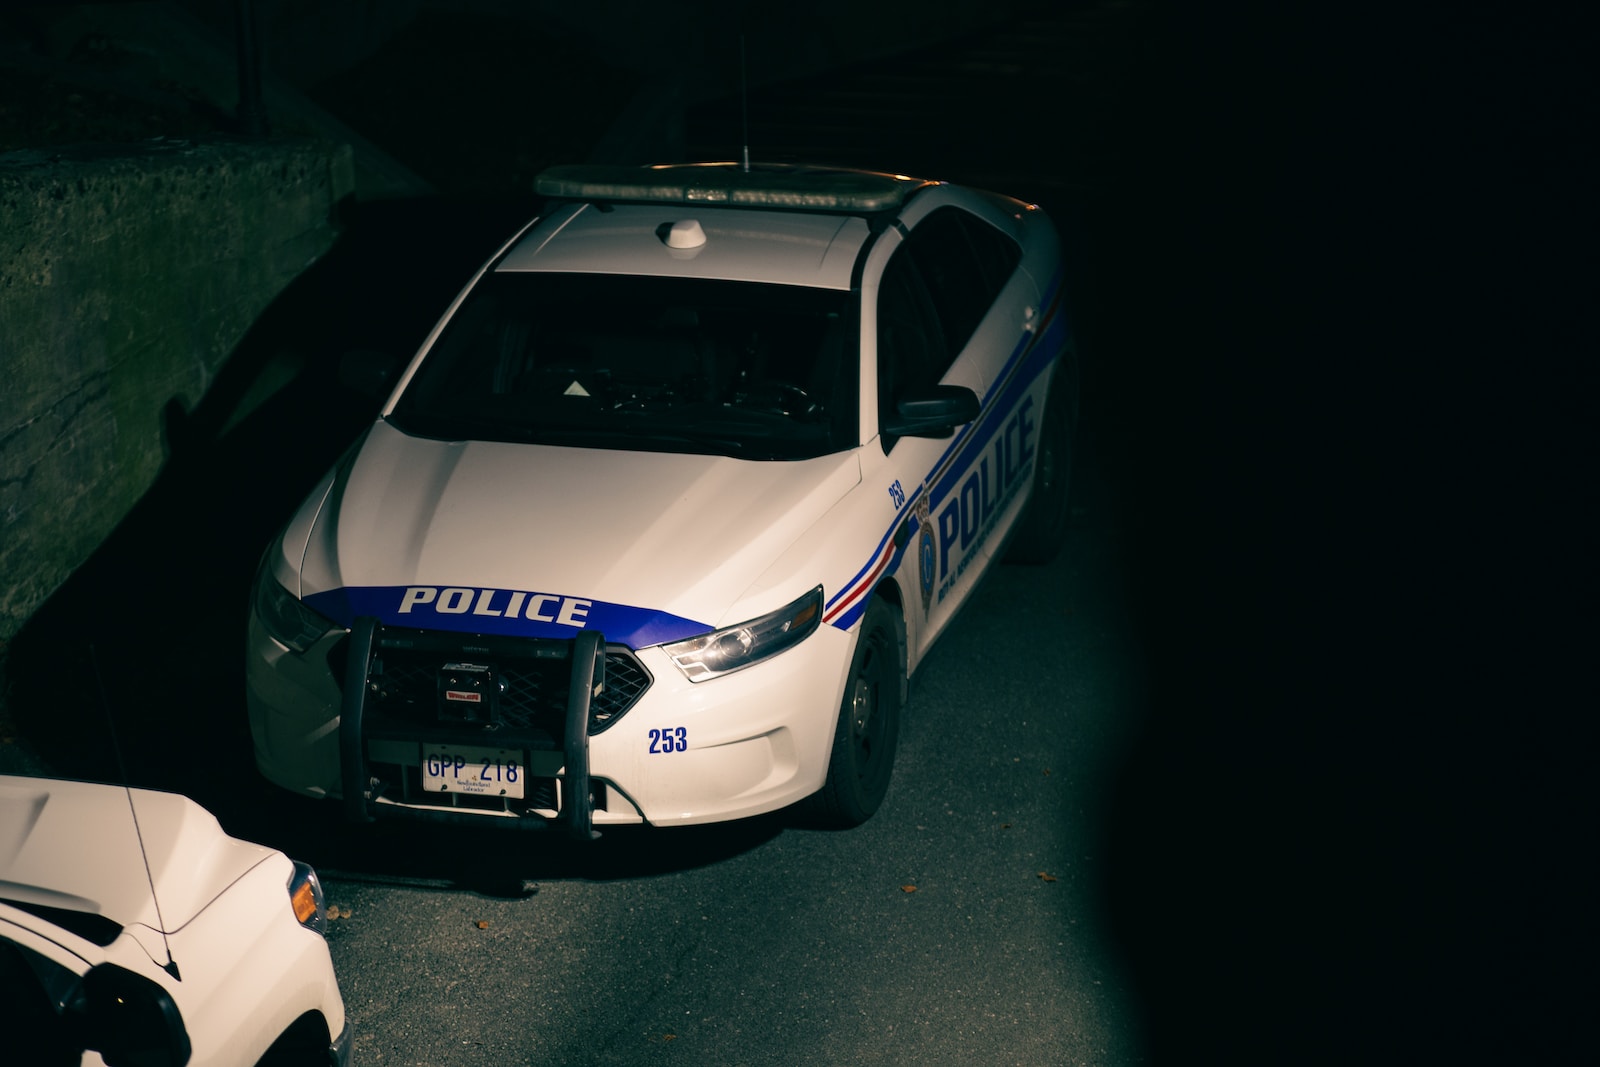 Night time scene of white police car with blue writing.